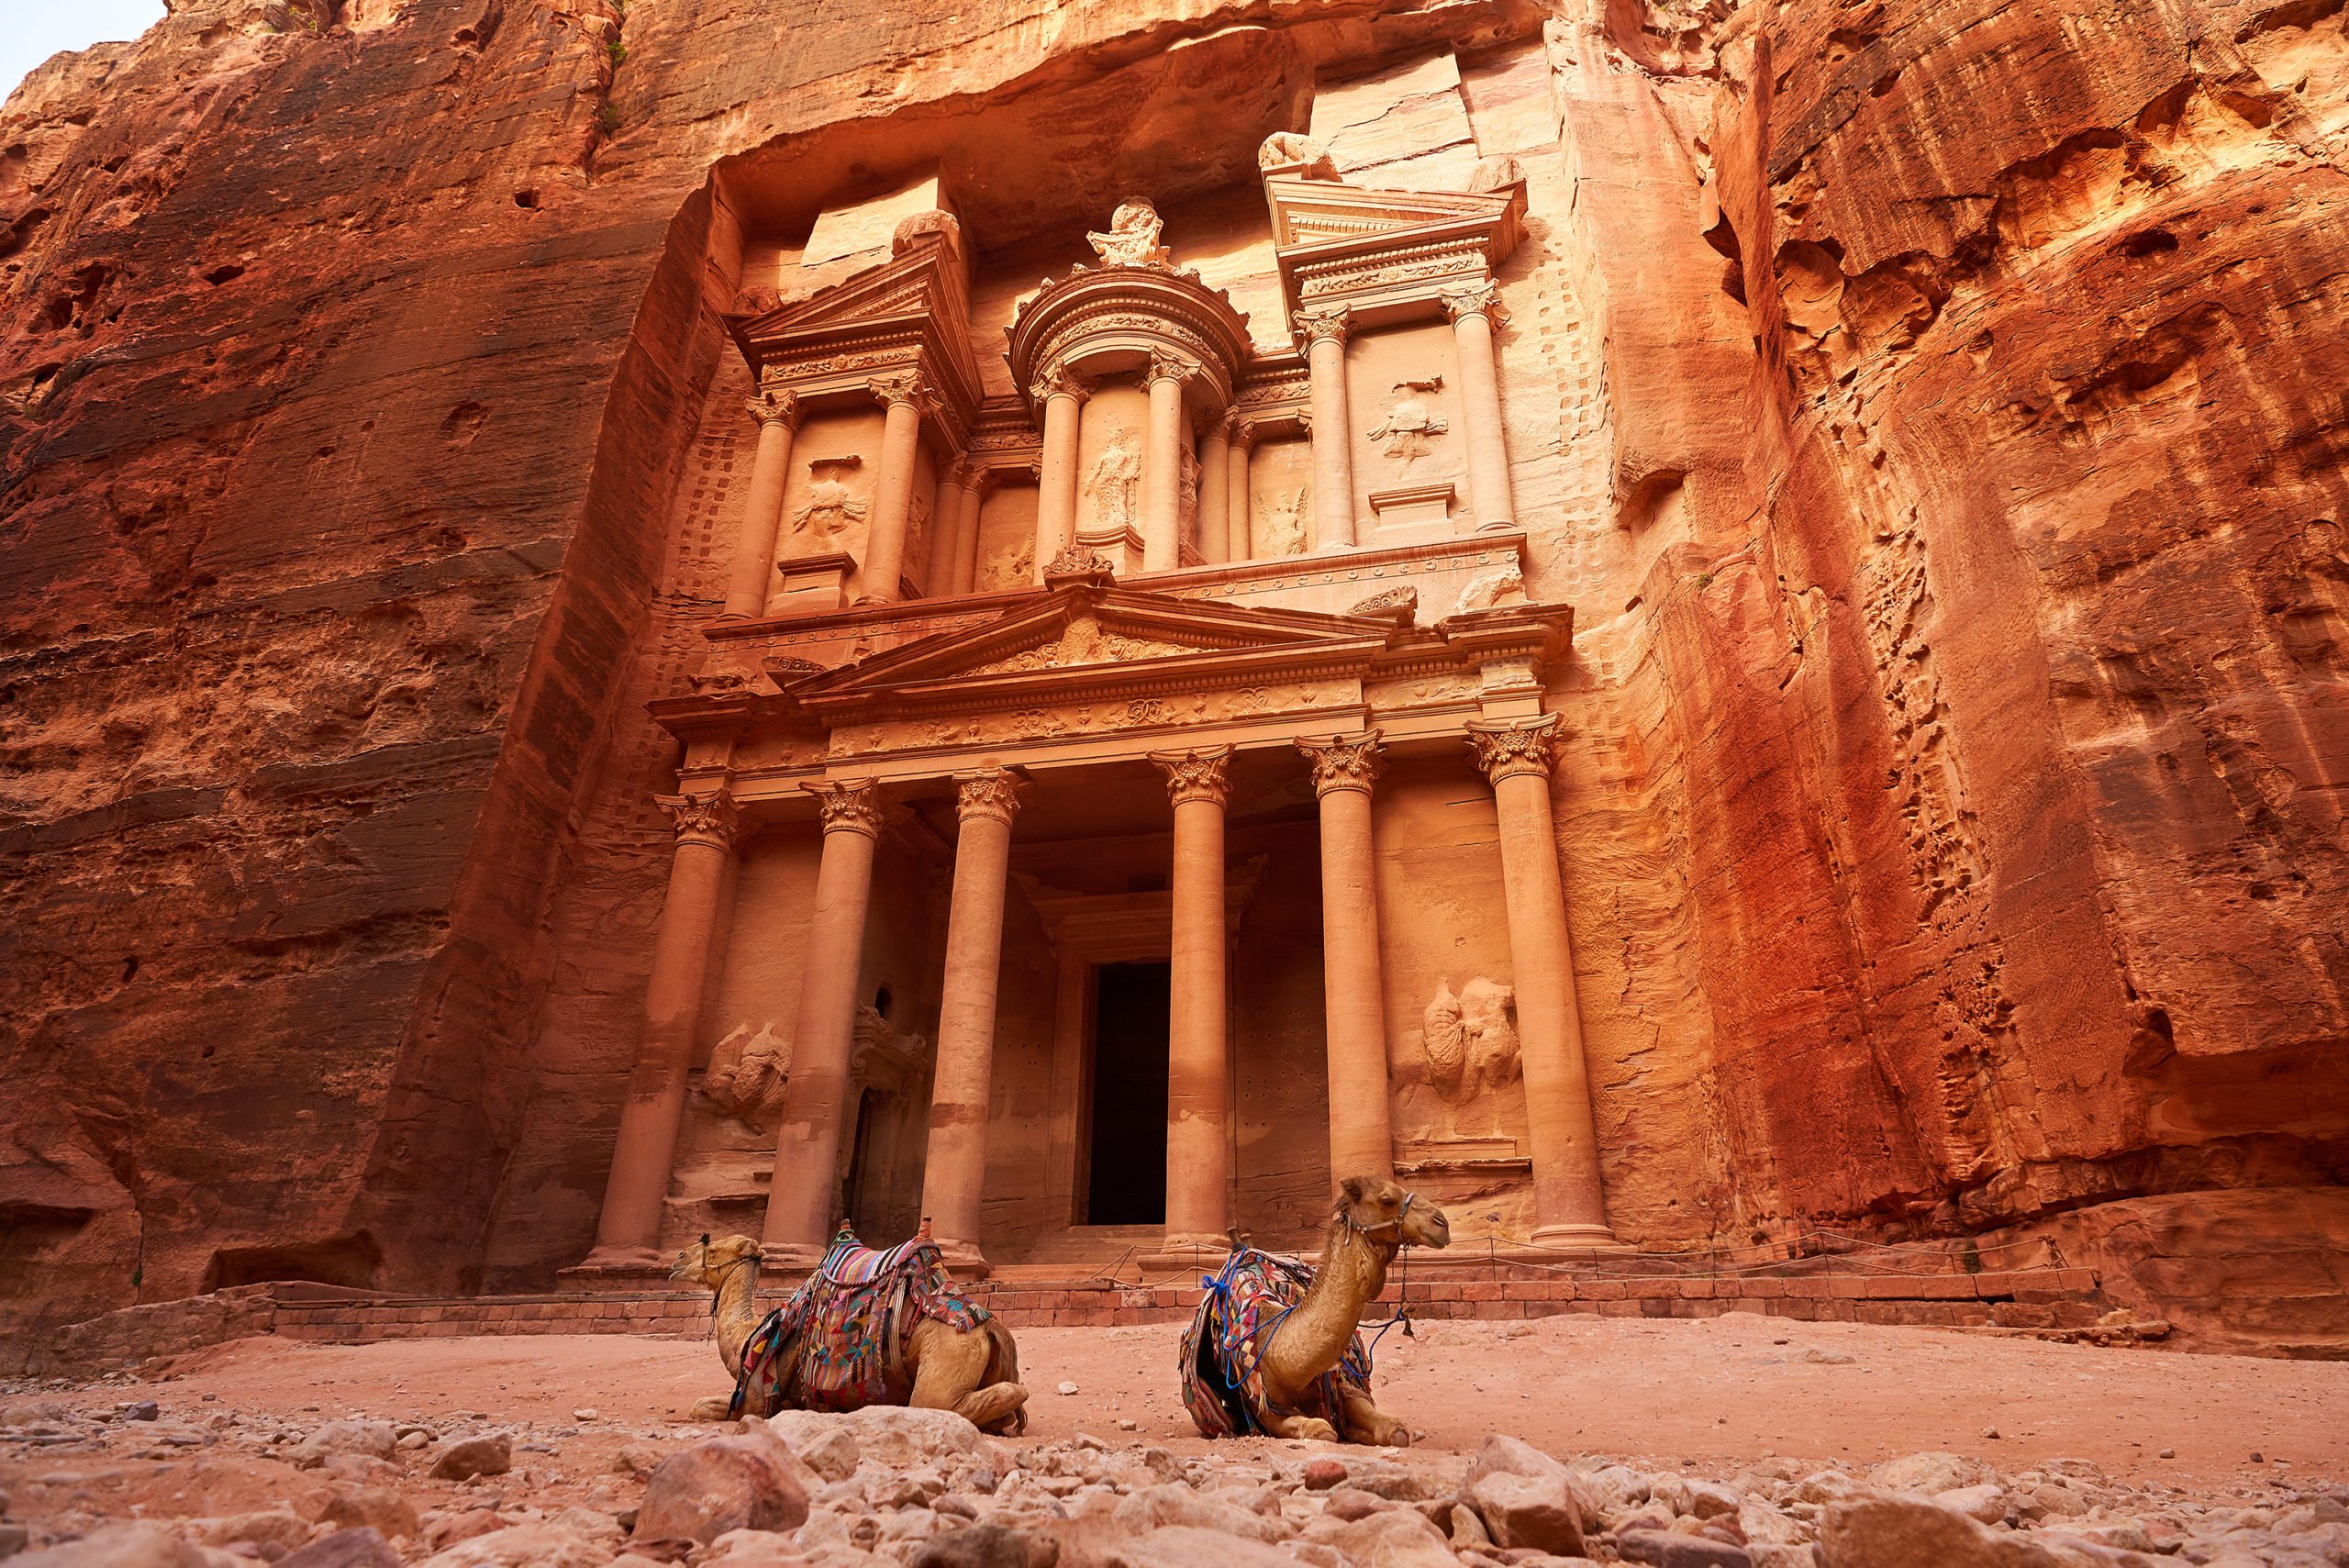 Explore The Nabetean City Of Petra On The Highlights Of Jordan 4 Day Tour From Amman Or The Dead Sea